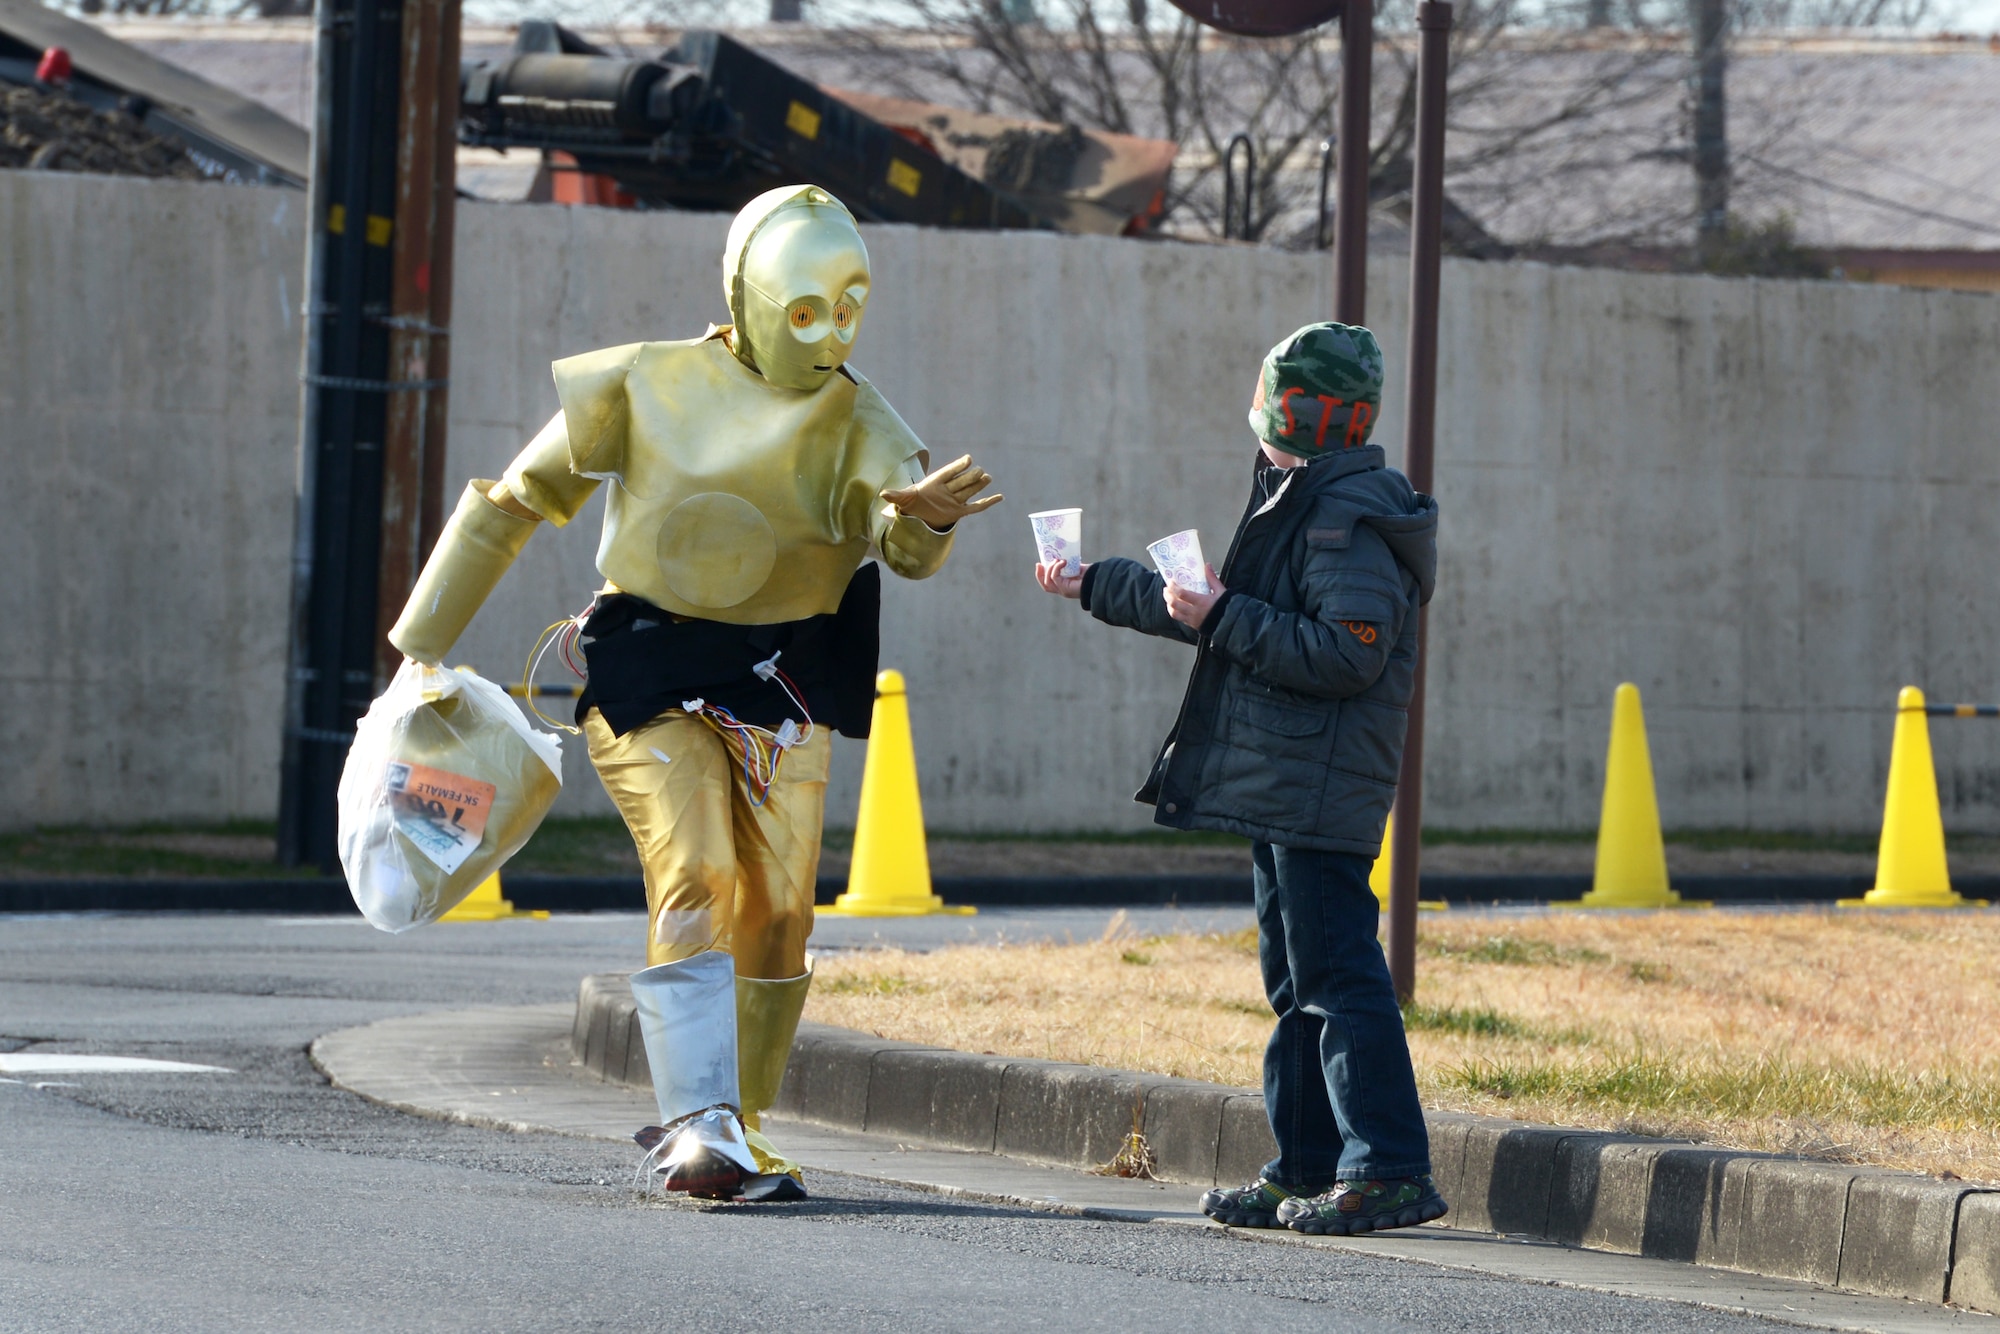 A participant dressed as C-3PO reaches for a cup of water during the 35th Annual
Frostbite Run at Yokota Air Base, Japan, Jan. 17, 2016. More than 9,000 people
participated in the annual event. Yokota hosts events throughout the year to allow
interaction between Japanese citizens and US service members and their families.
(U.S. Air Force photo by Staff Sgt. Cody H. Ramirez/Released)